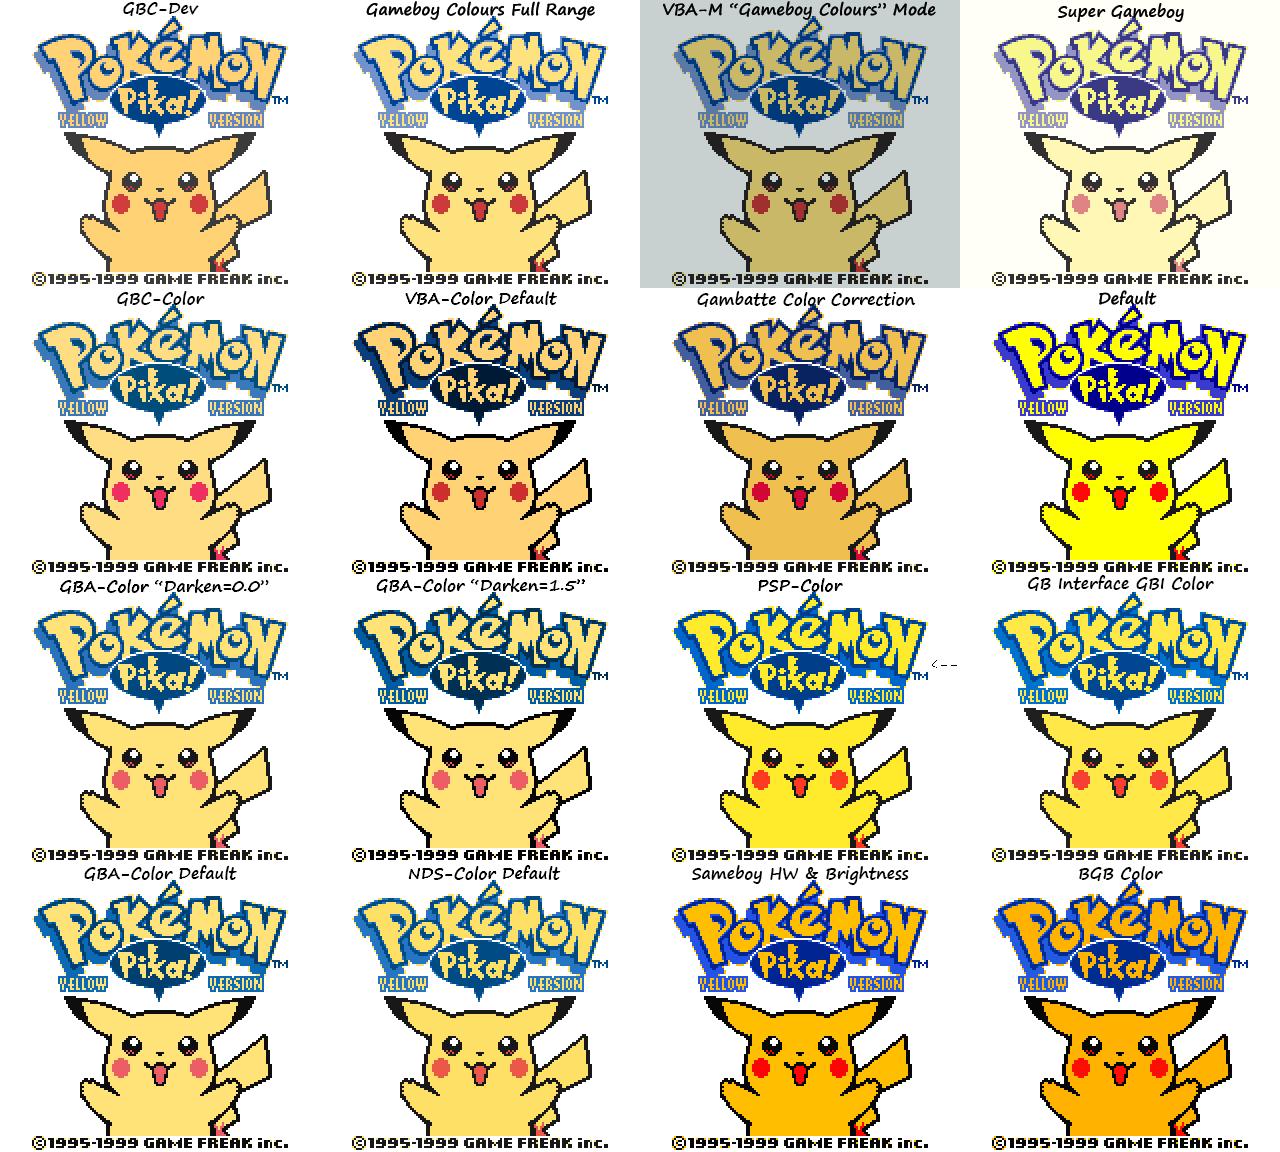 Pokefan531's Posts — All the comparisons of software color...